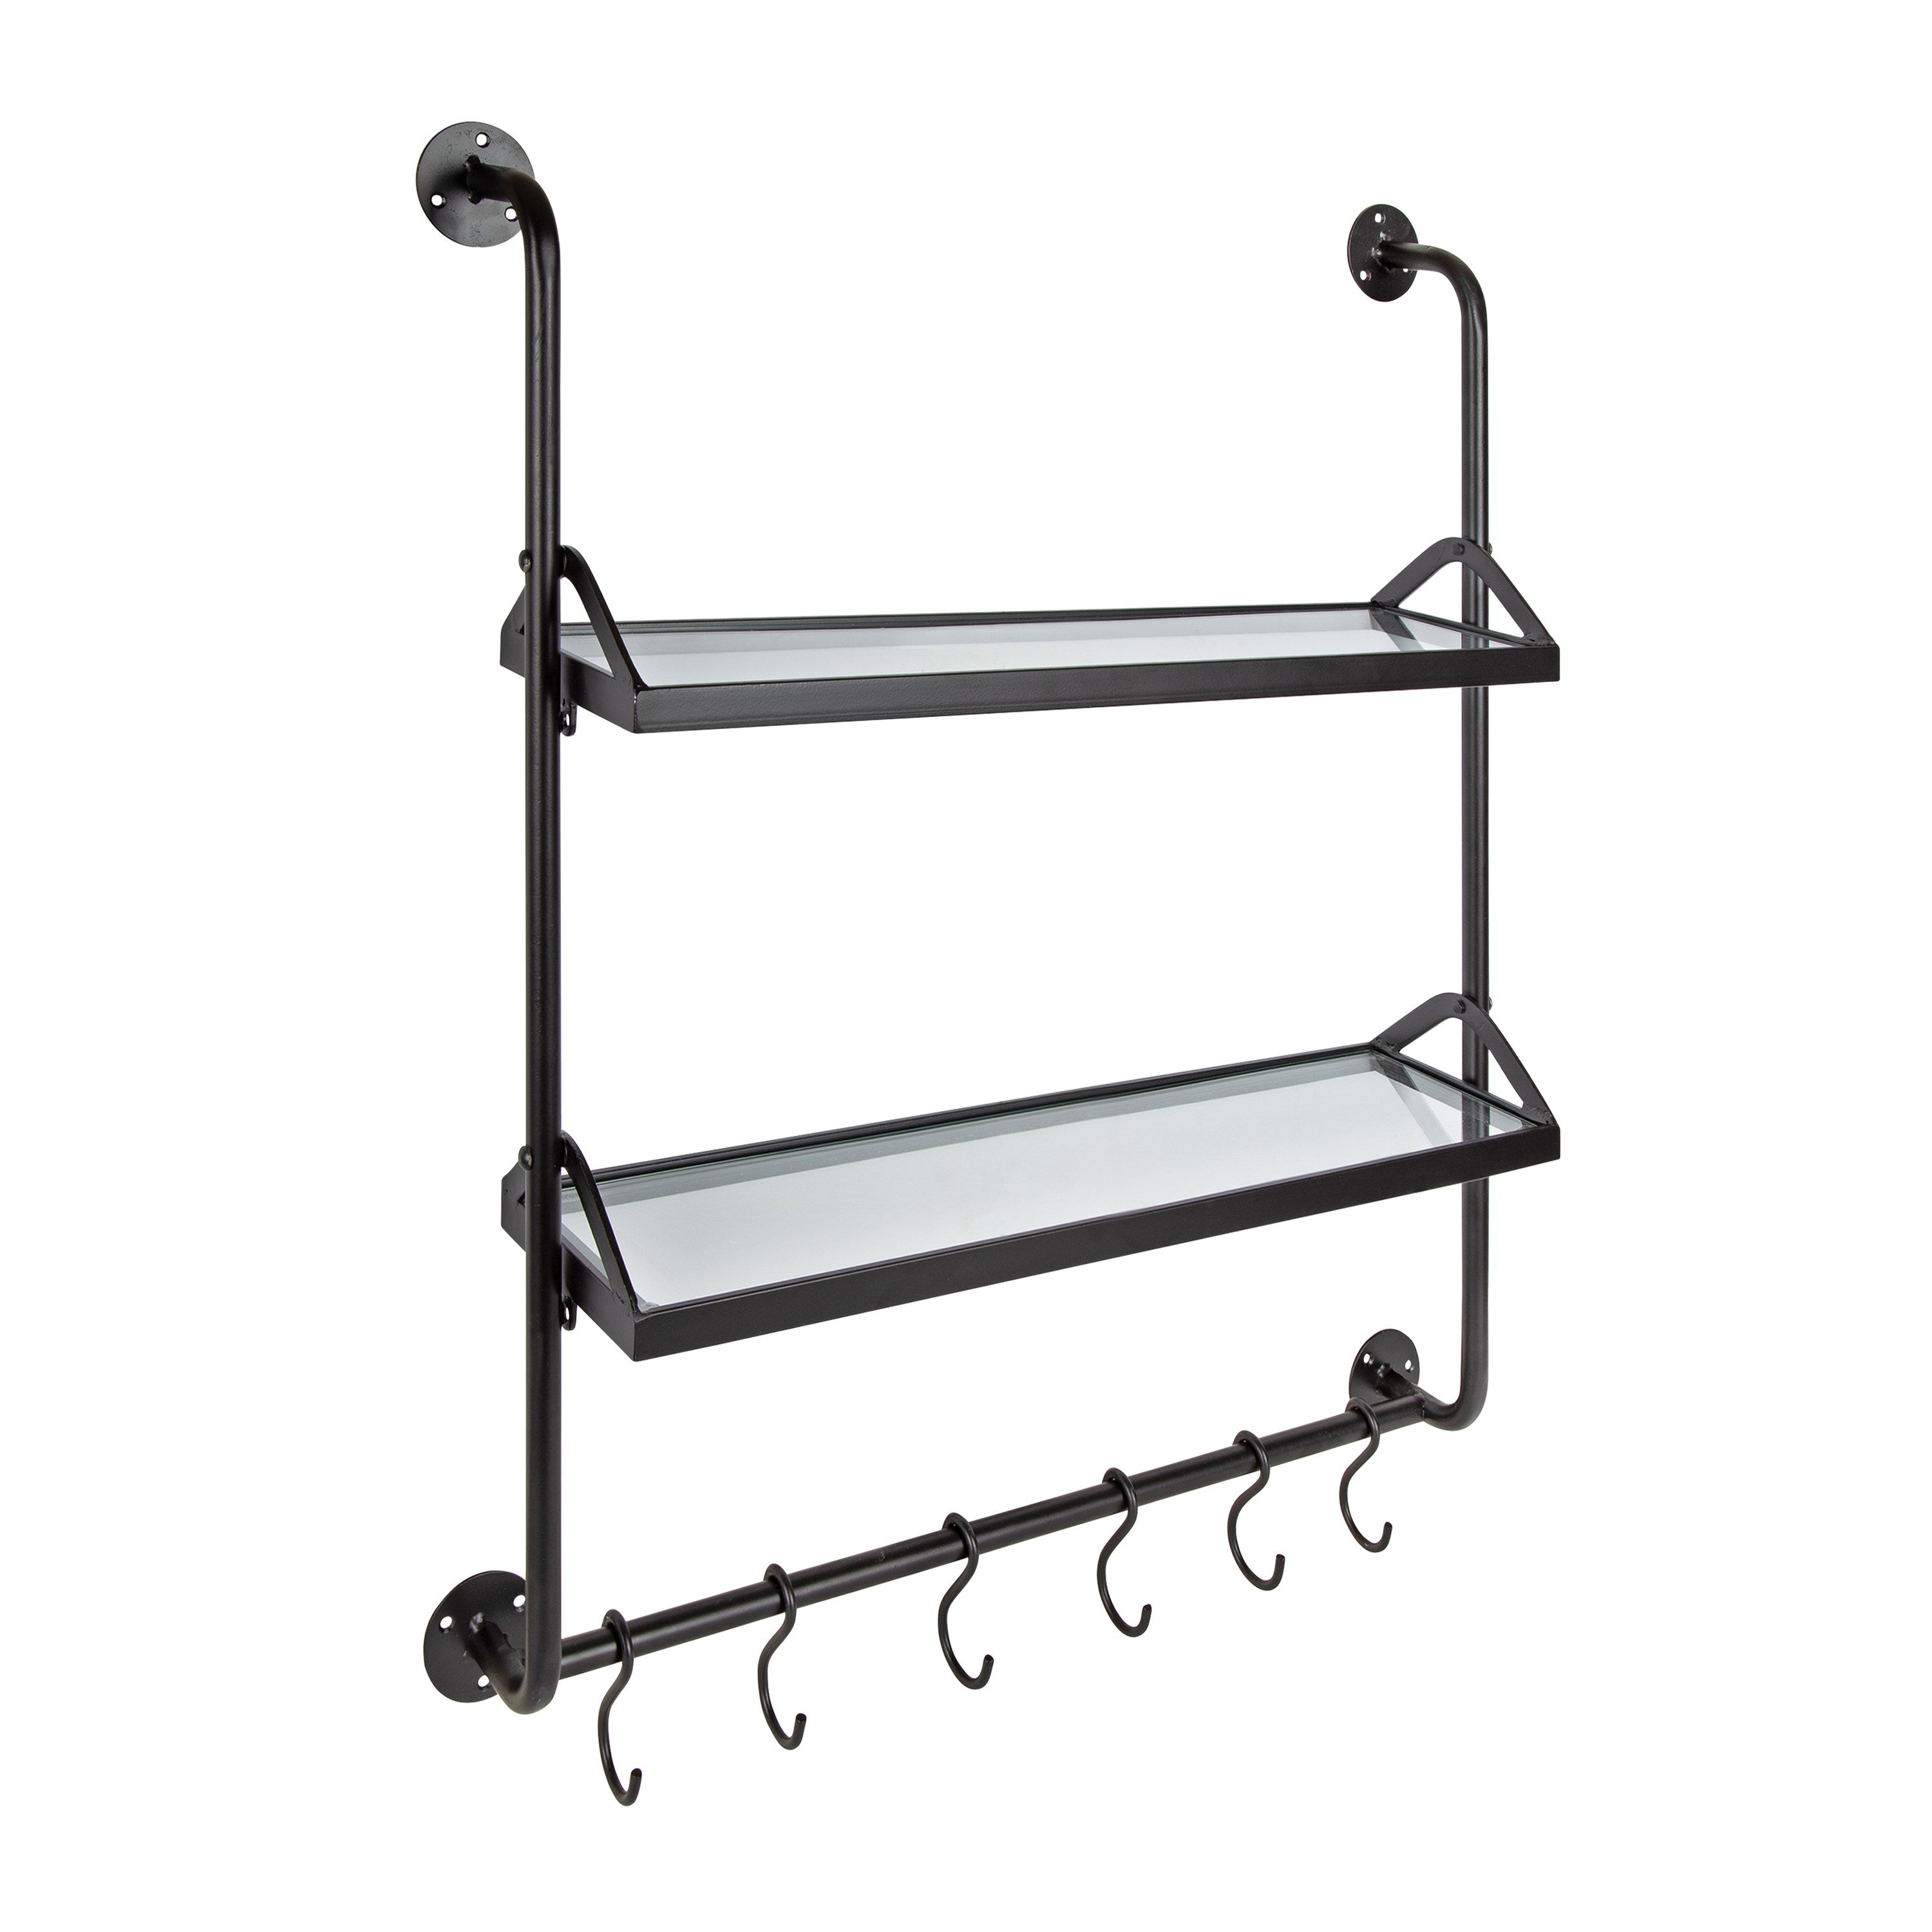 Kate and Laurel Marit Modern Industrial Wall Shelf with Metal Pipe